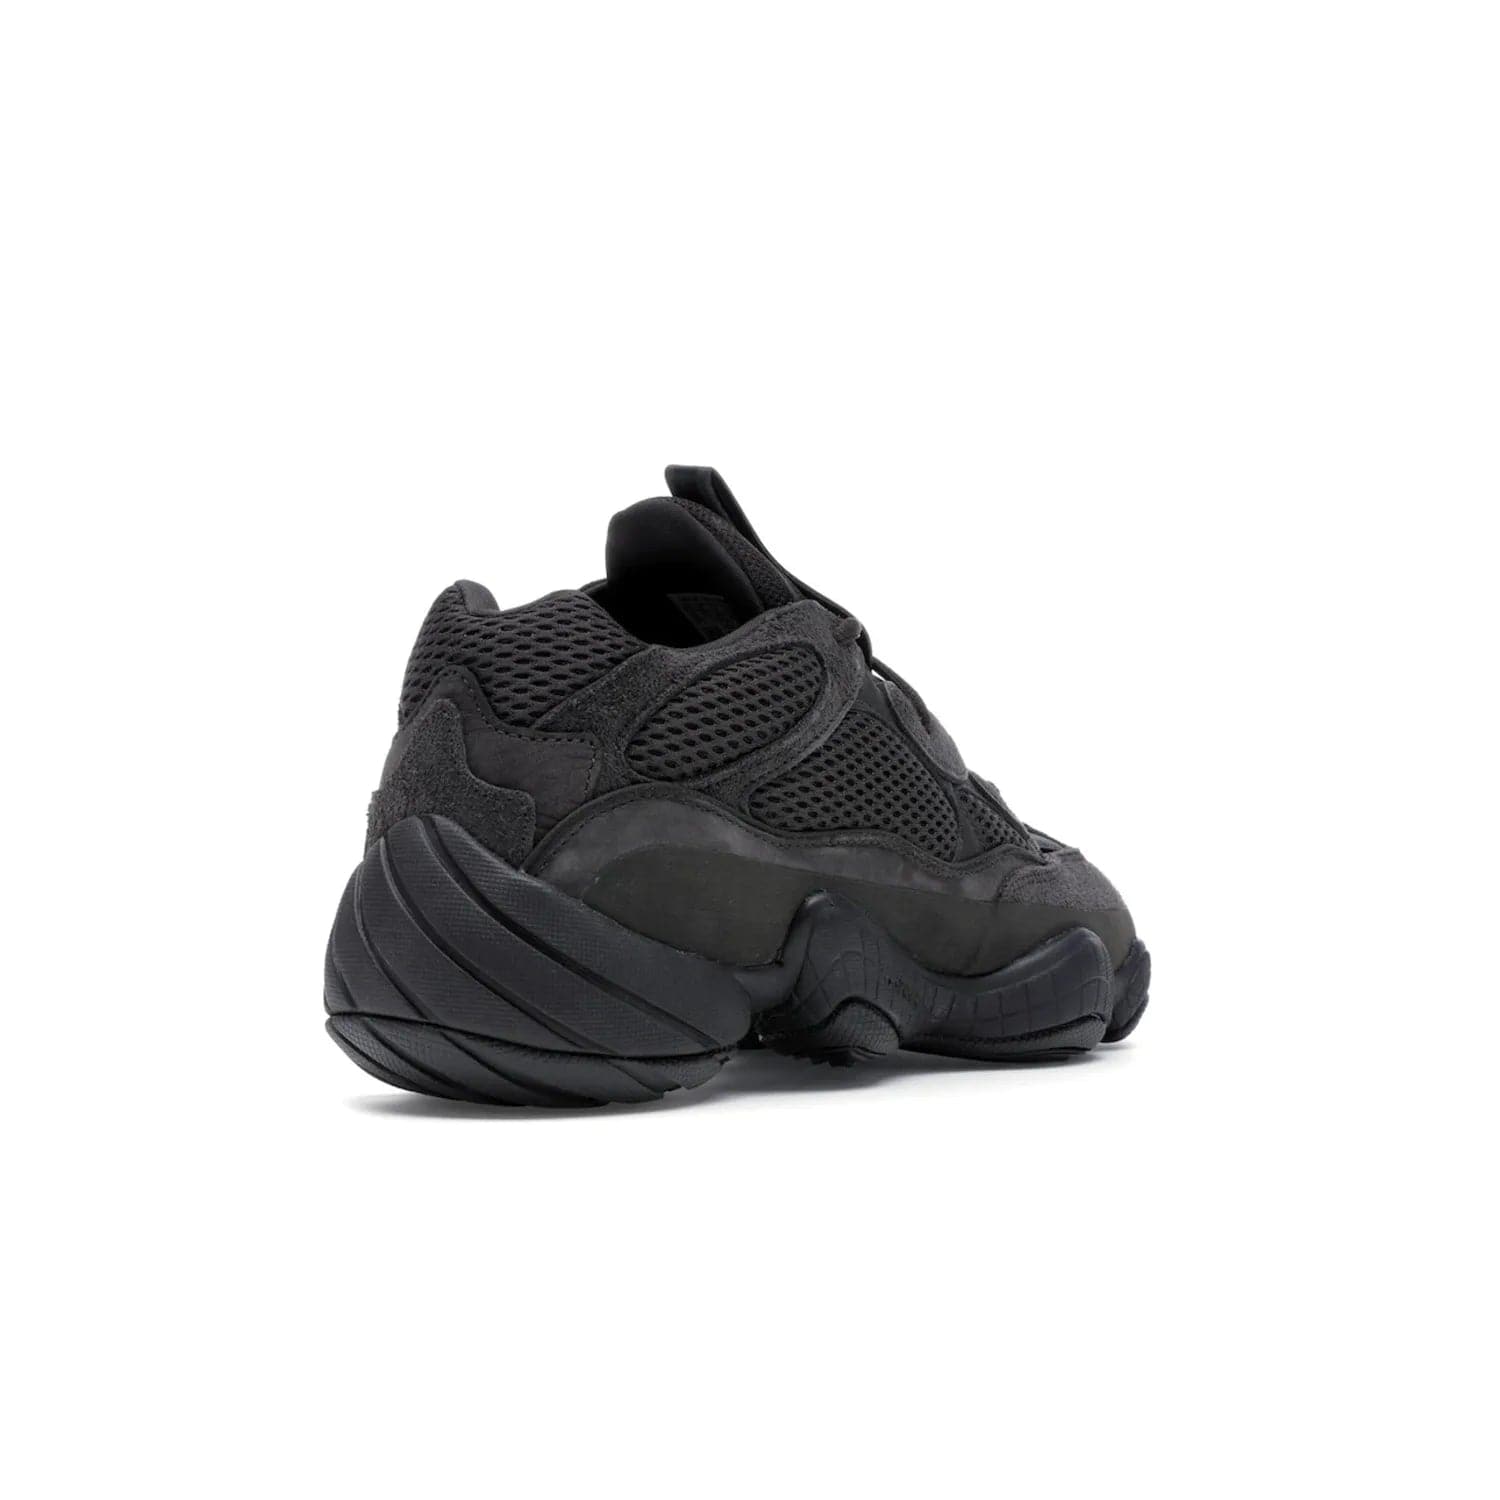 adidas Yeezy 500 Utility Black - Image 32 - Only at www.BallersClubKickz.com - Iconic adidas Yeezy 500 Utility Black in All-Black colorway. Durable black mesh and suede upper with adiPRENE® sole delivers comfort and support. Be unstoppable with the Yeezy 500 Utility Black. Released July 2018.